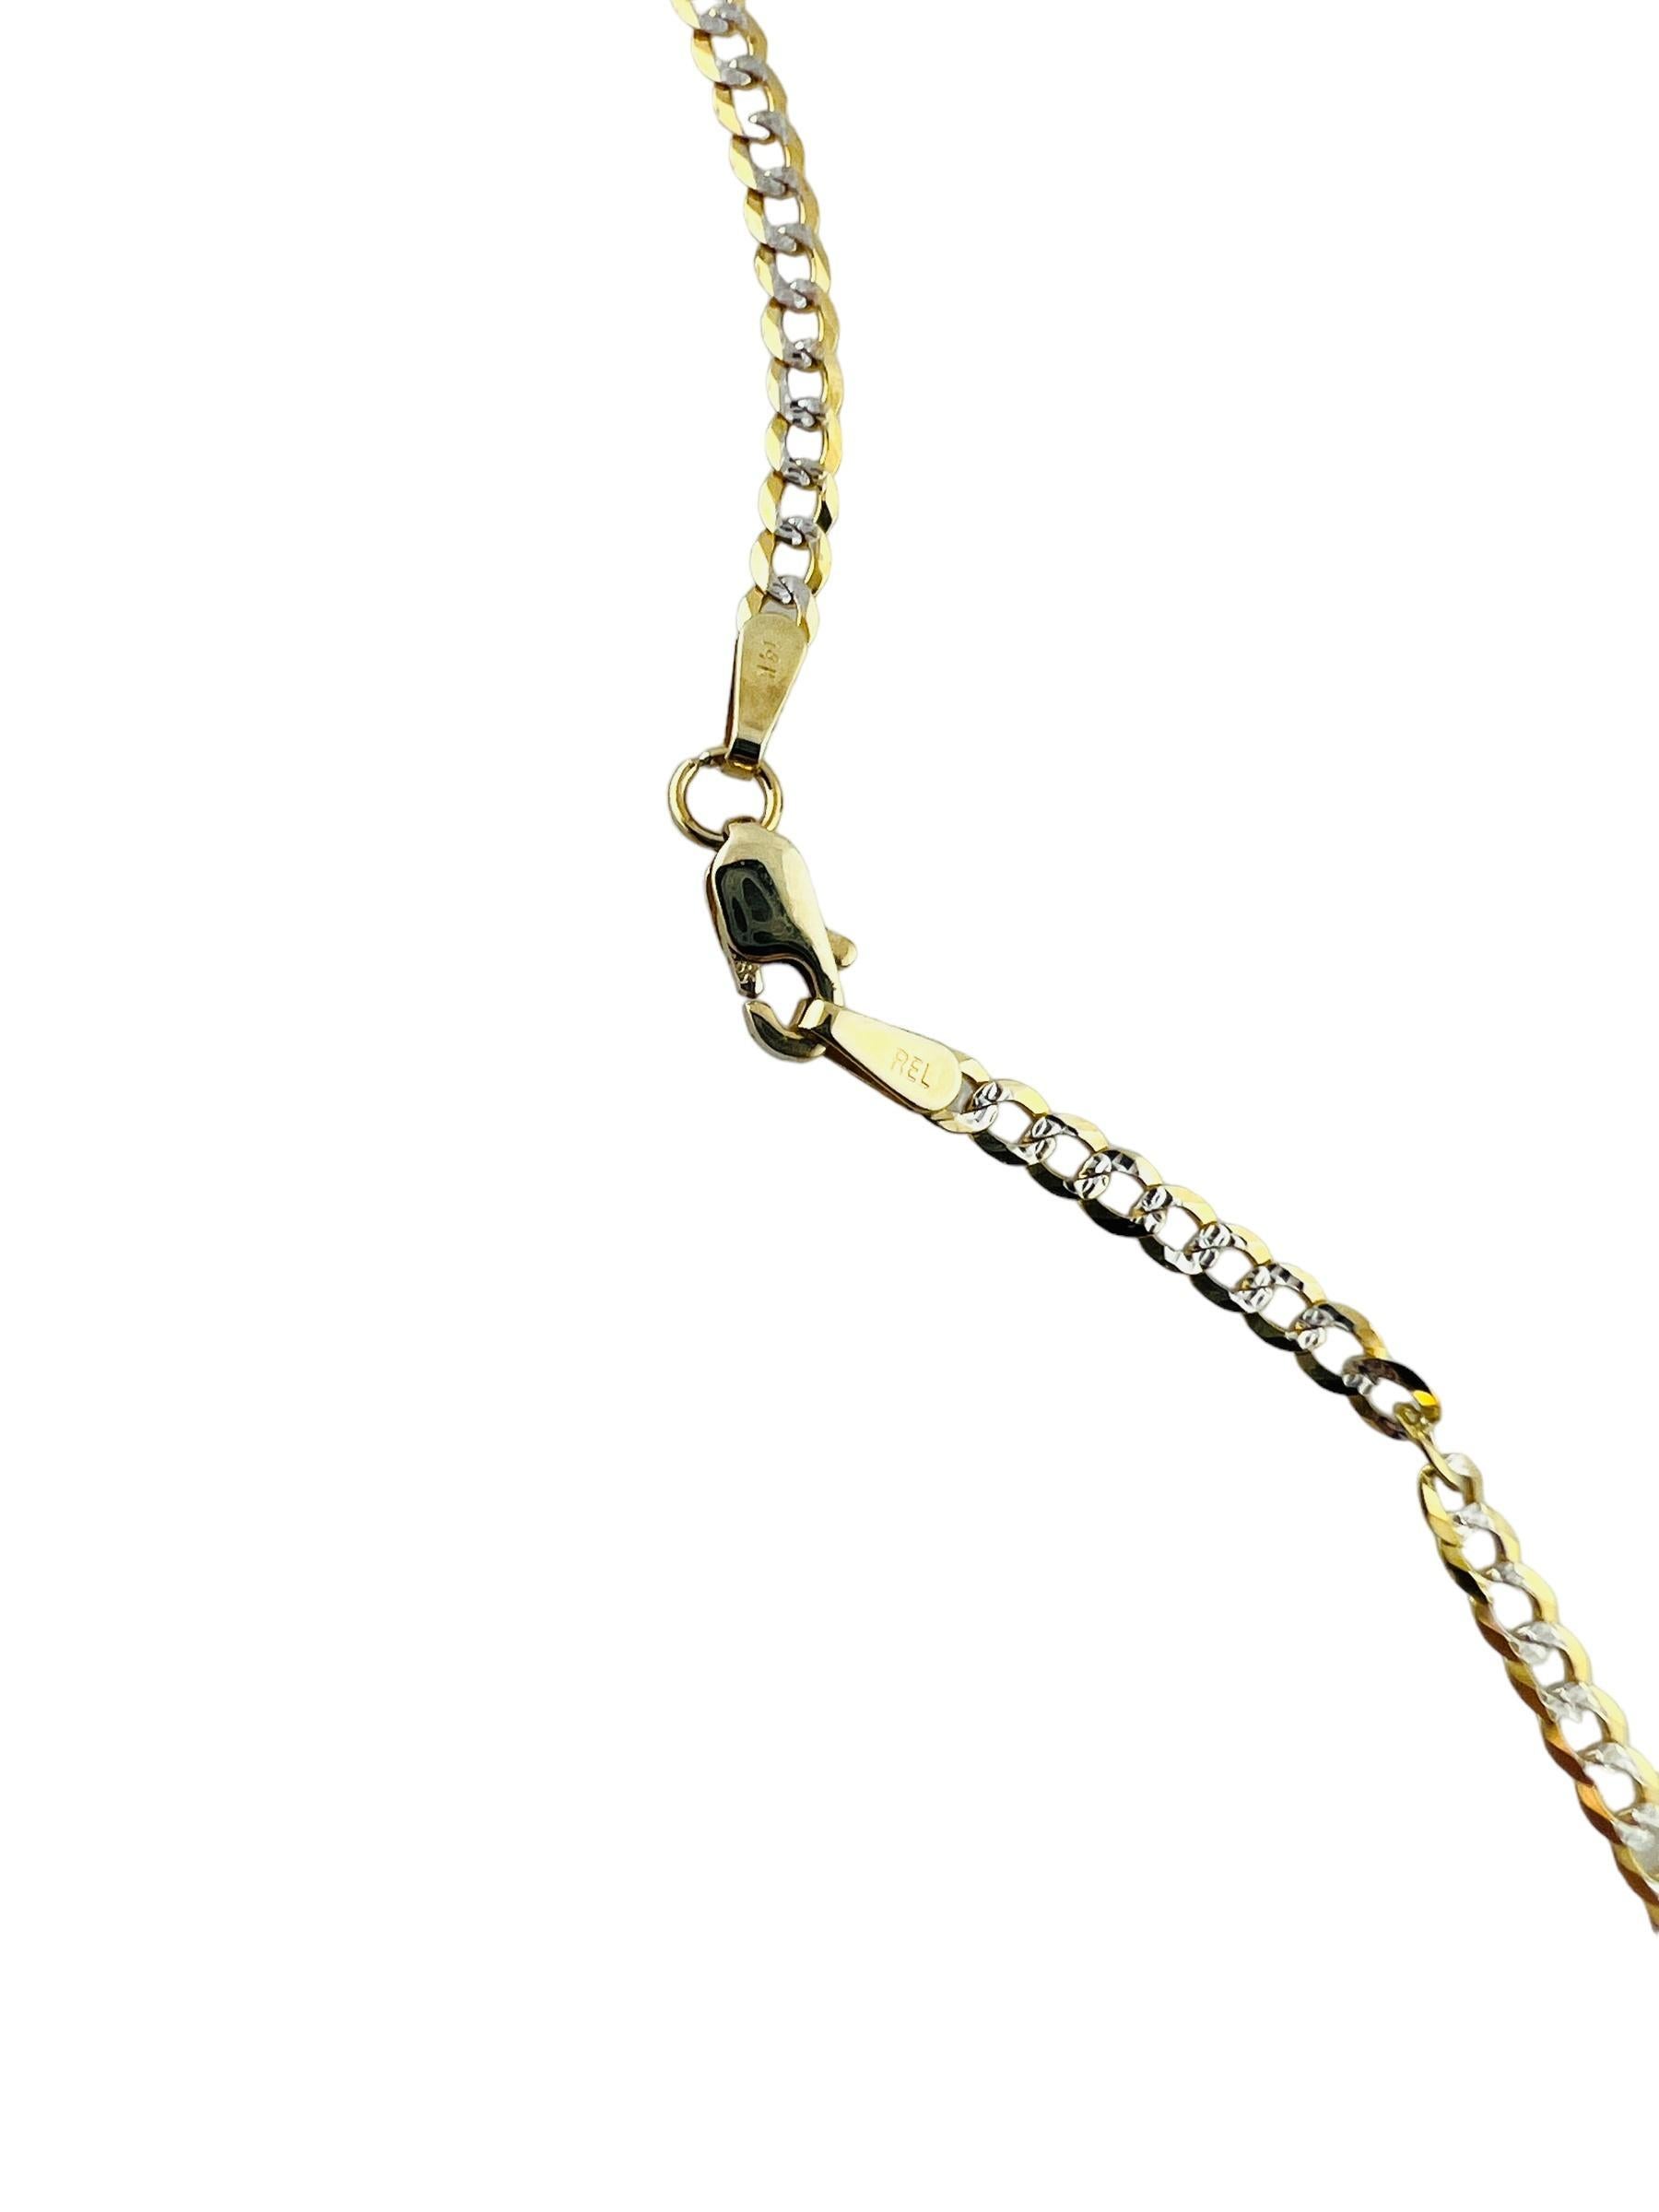 14K Yellow and White Gold Interlocking Link Necklace

This 18